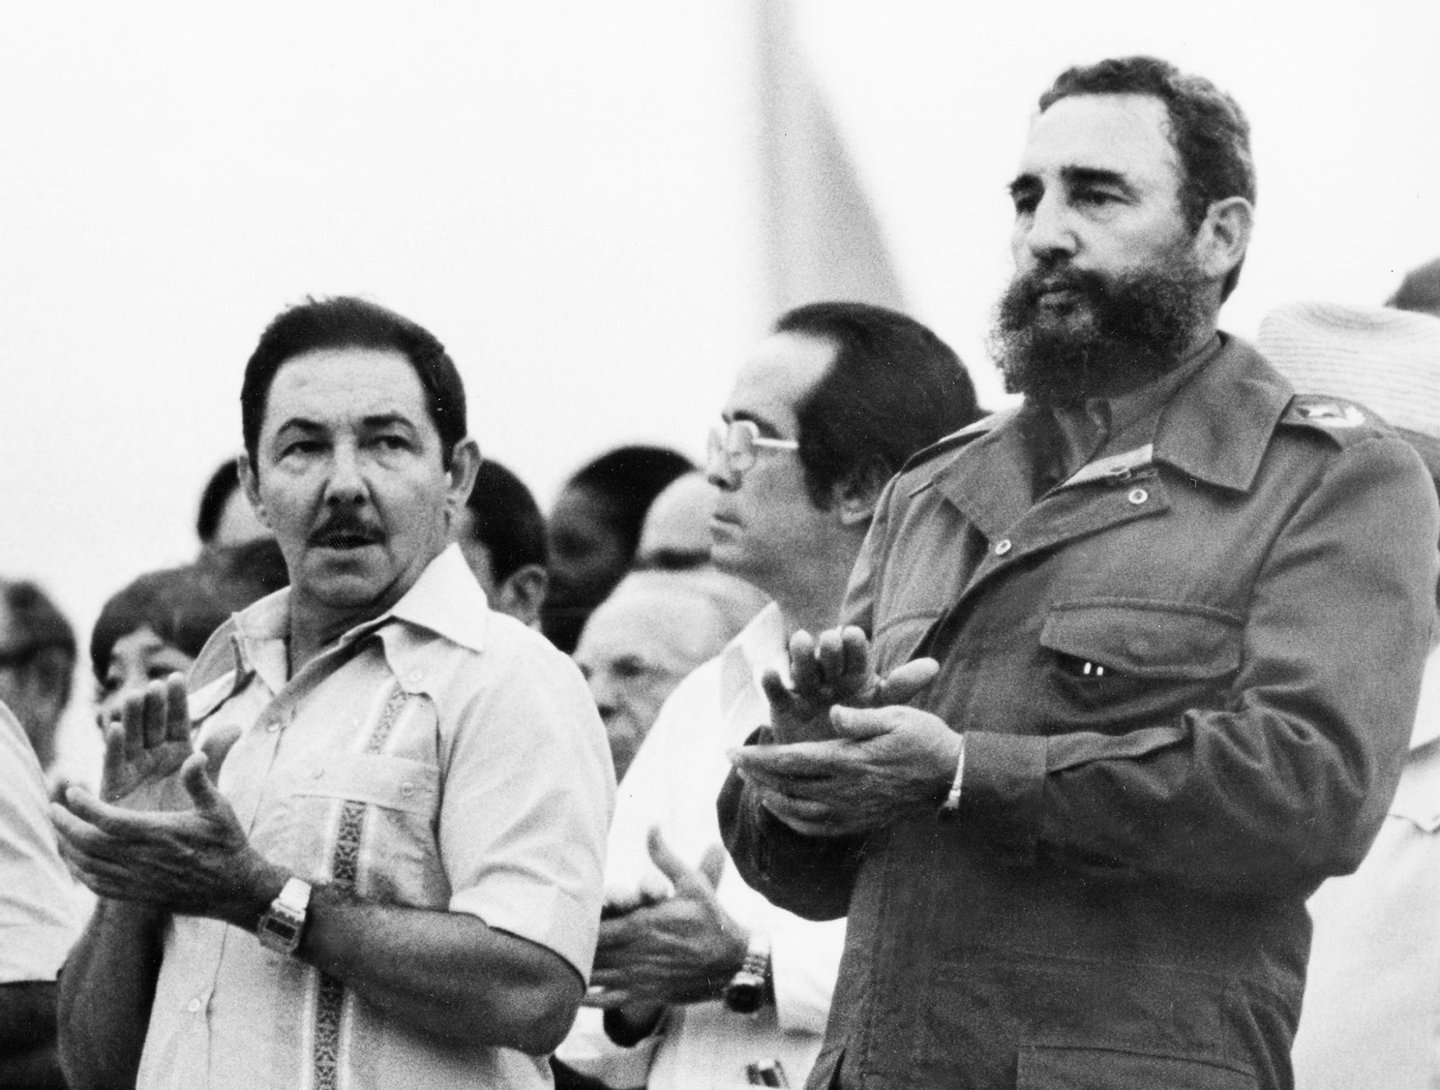 Vice-president General Raul Castro and his brother president Fidel Castro attend the 11th world festival of youth and students, in August 1978 in Havana. / AFP / PRENSA LATINA / - (Photo credit should read -/AFP/Getty Images)